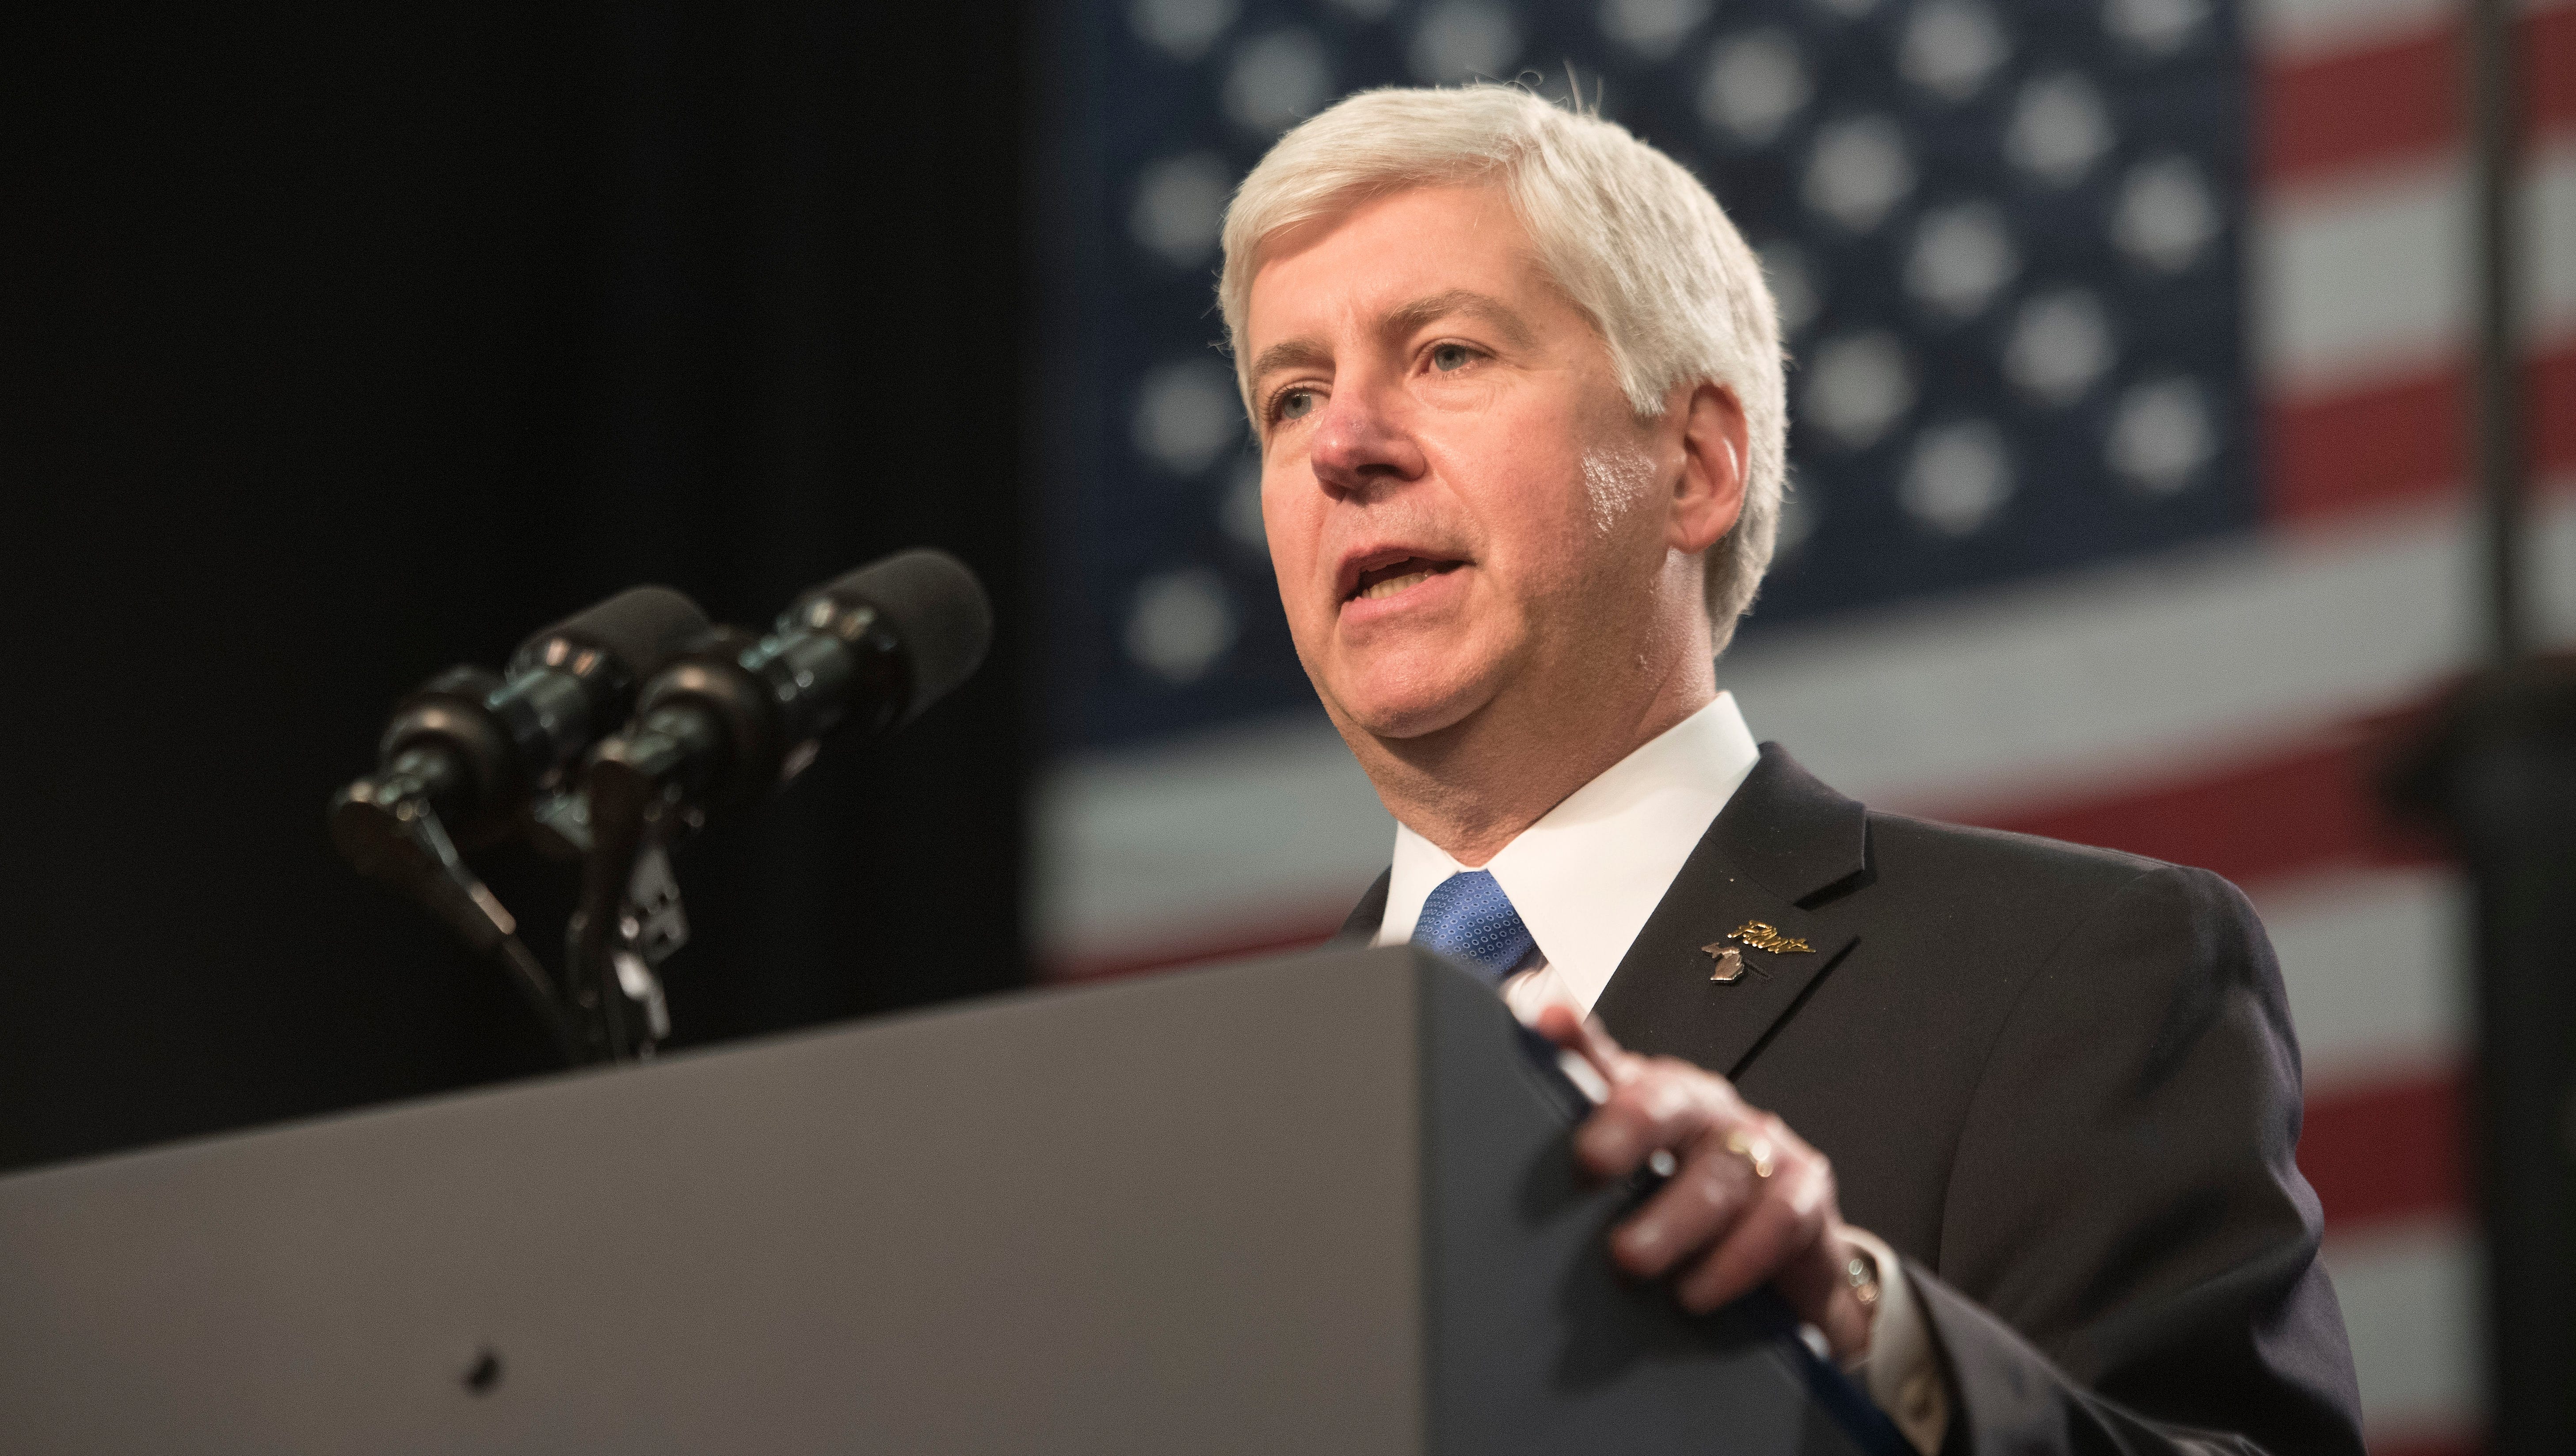 Michigan Gov. Rick Snyder speaks at Northwestern High School before President Obama, as the audience loudly booed.